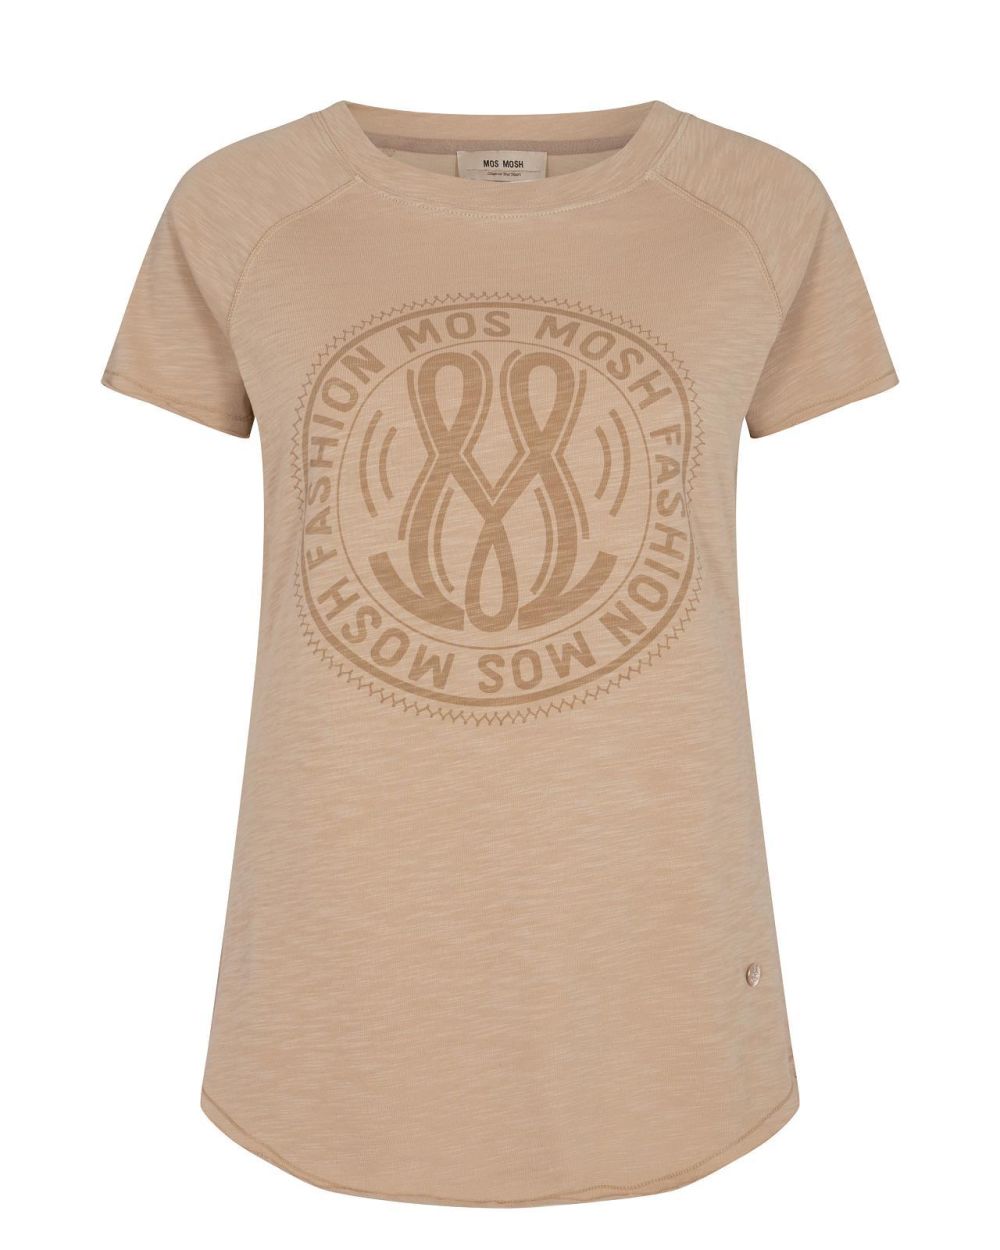 Mos Mosh T-shirt Beige  (144250/708) - Corylie (Roeselare)